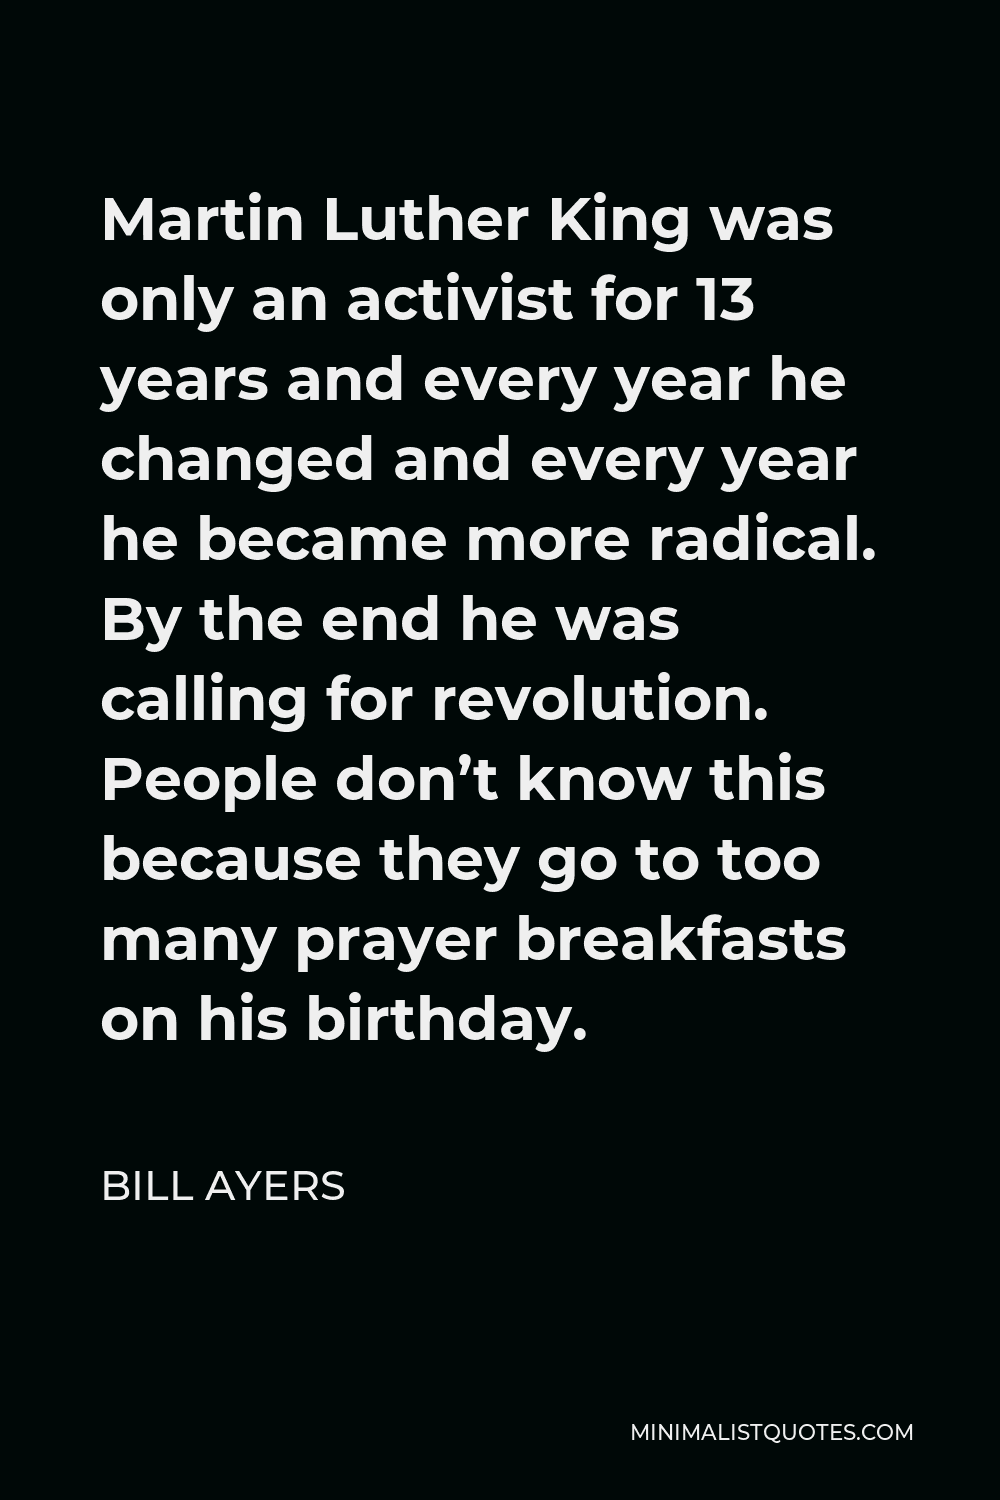 Bill Ayers Quote - Martin Luther King was only an activist for 13 years and every year he changed and every year he became more radical. By the end he was calling for revolution. People don’t know this because they go to too many prayer breakfasts on his birthday.